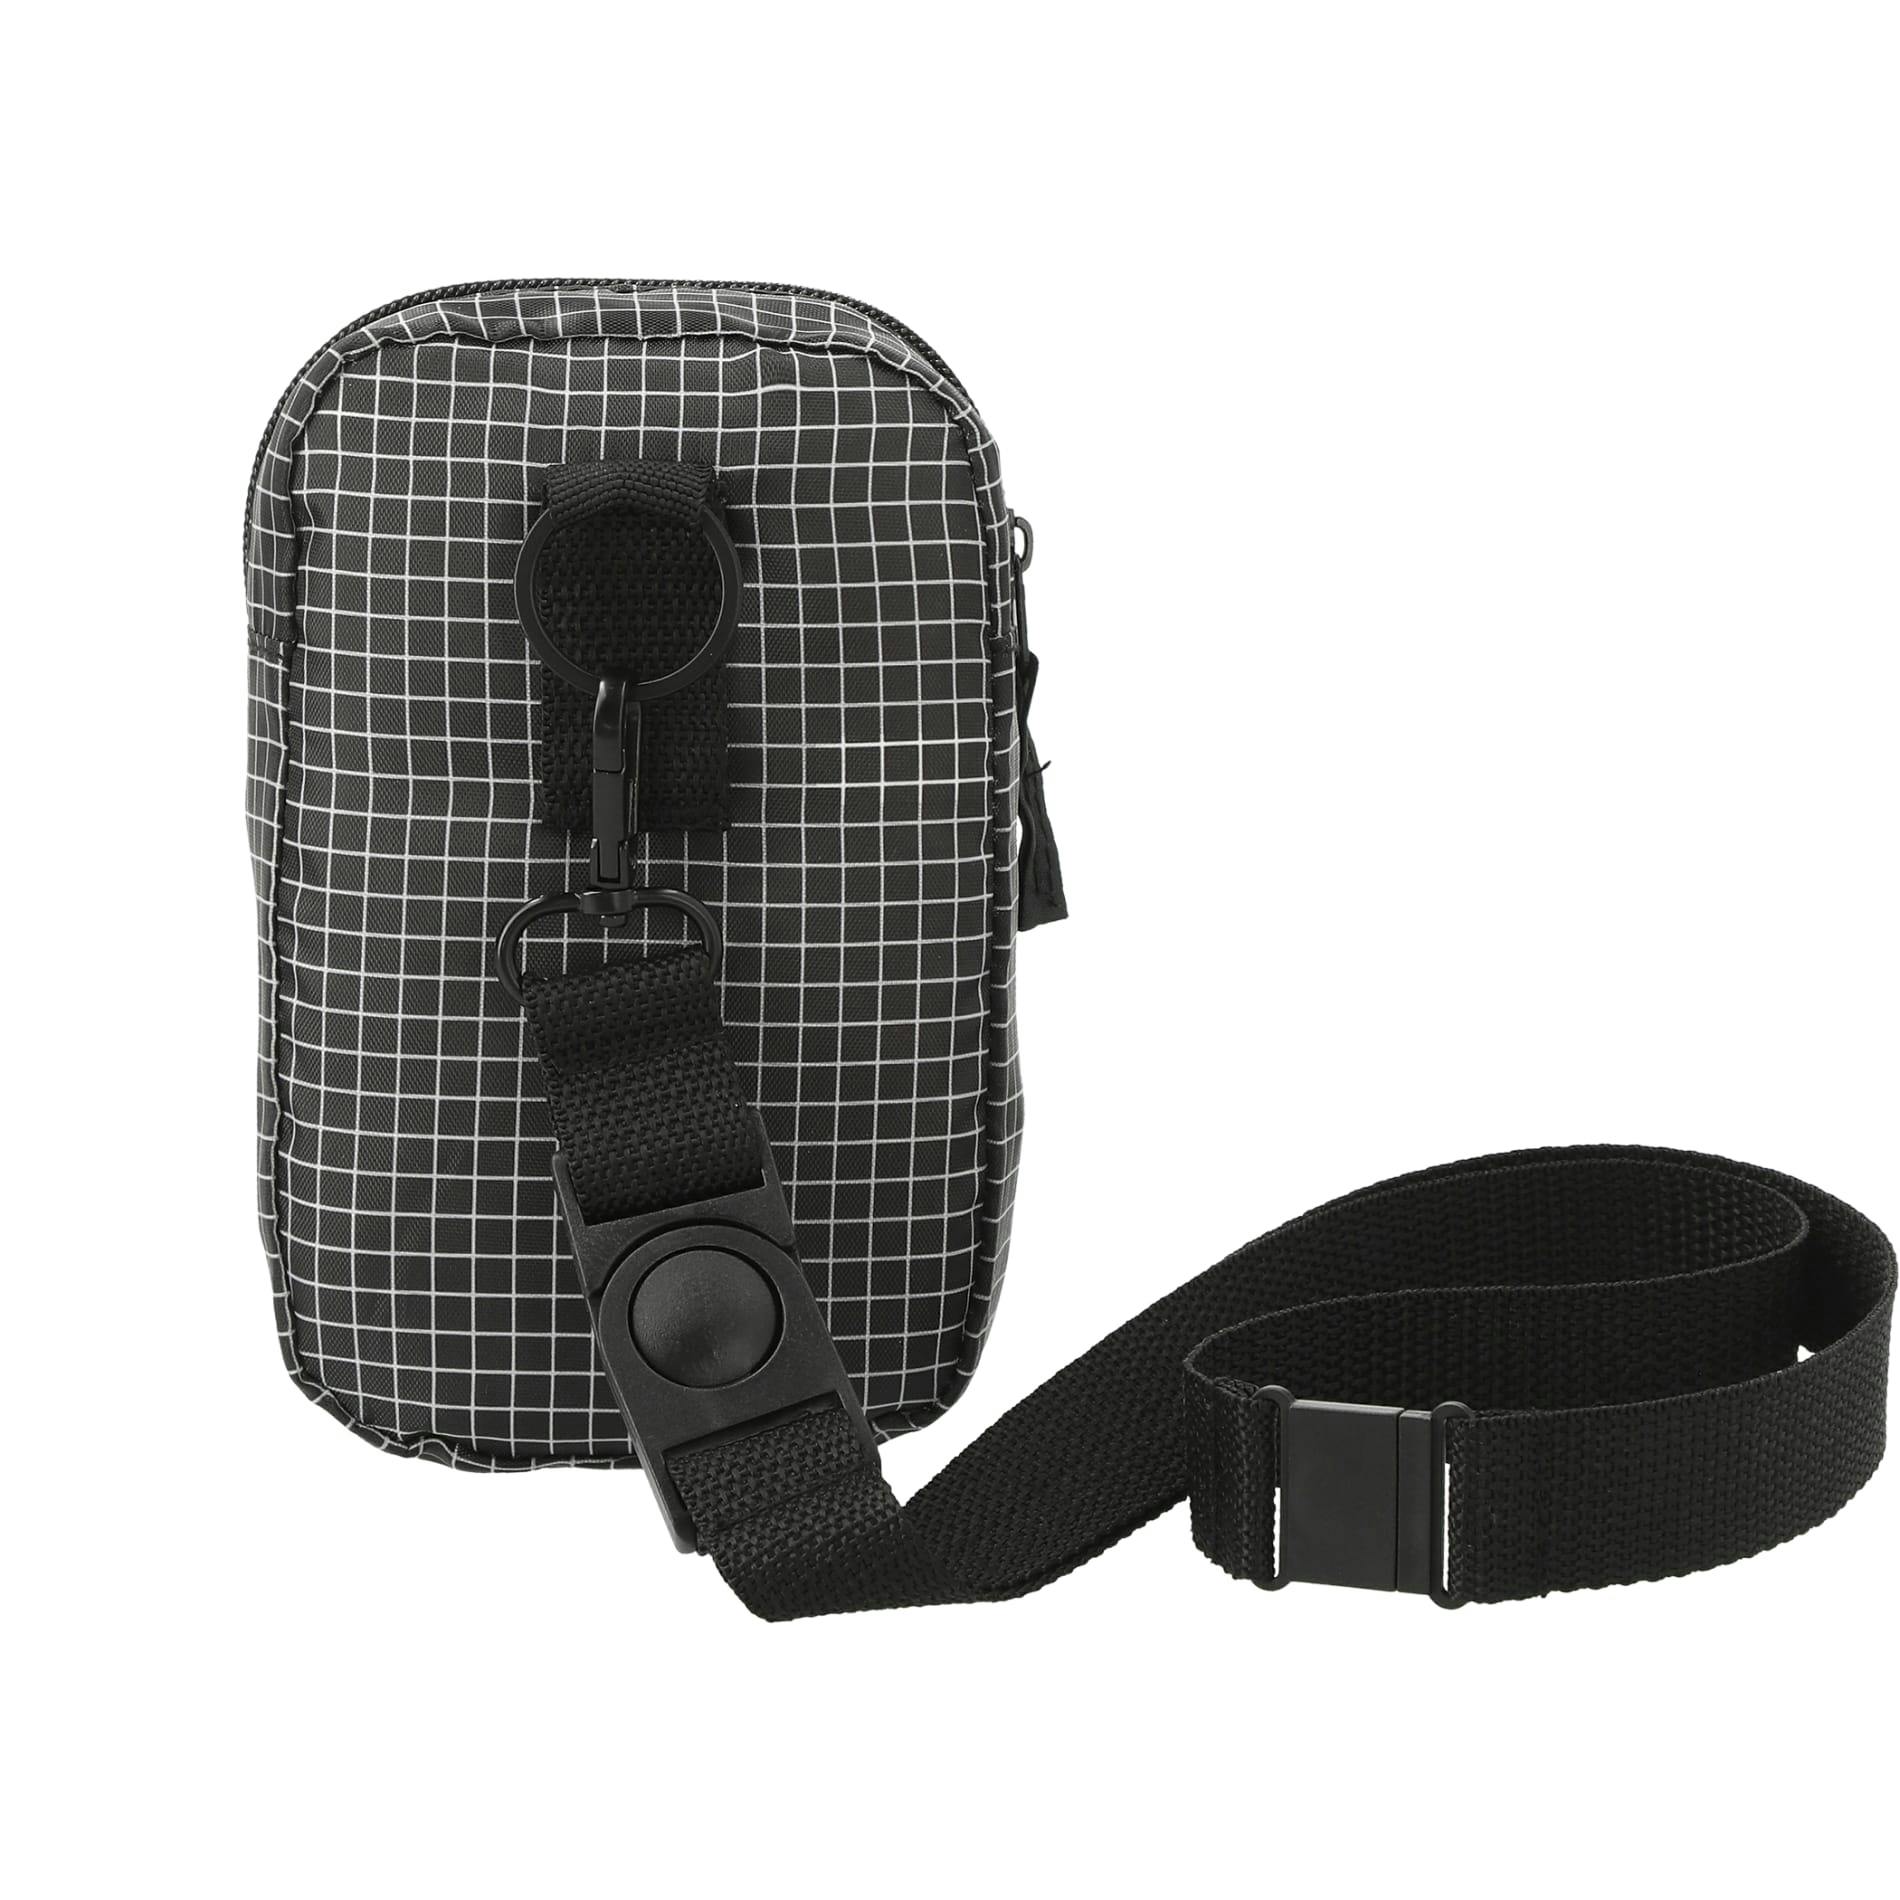 Grid Lanyard Phone Pouch - additional Image 4